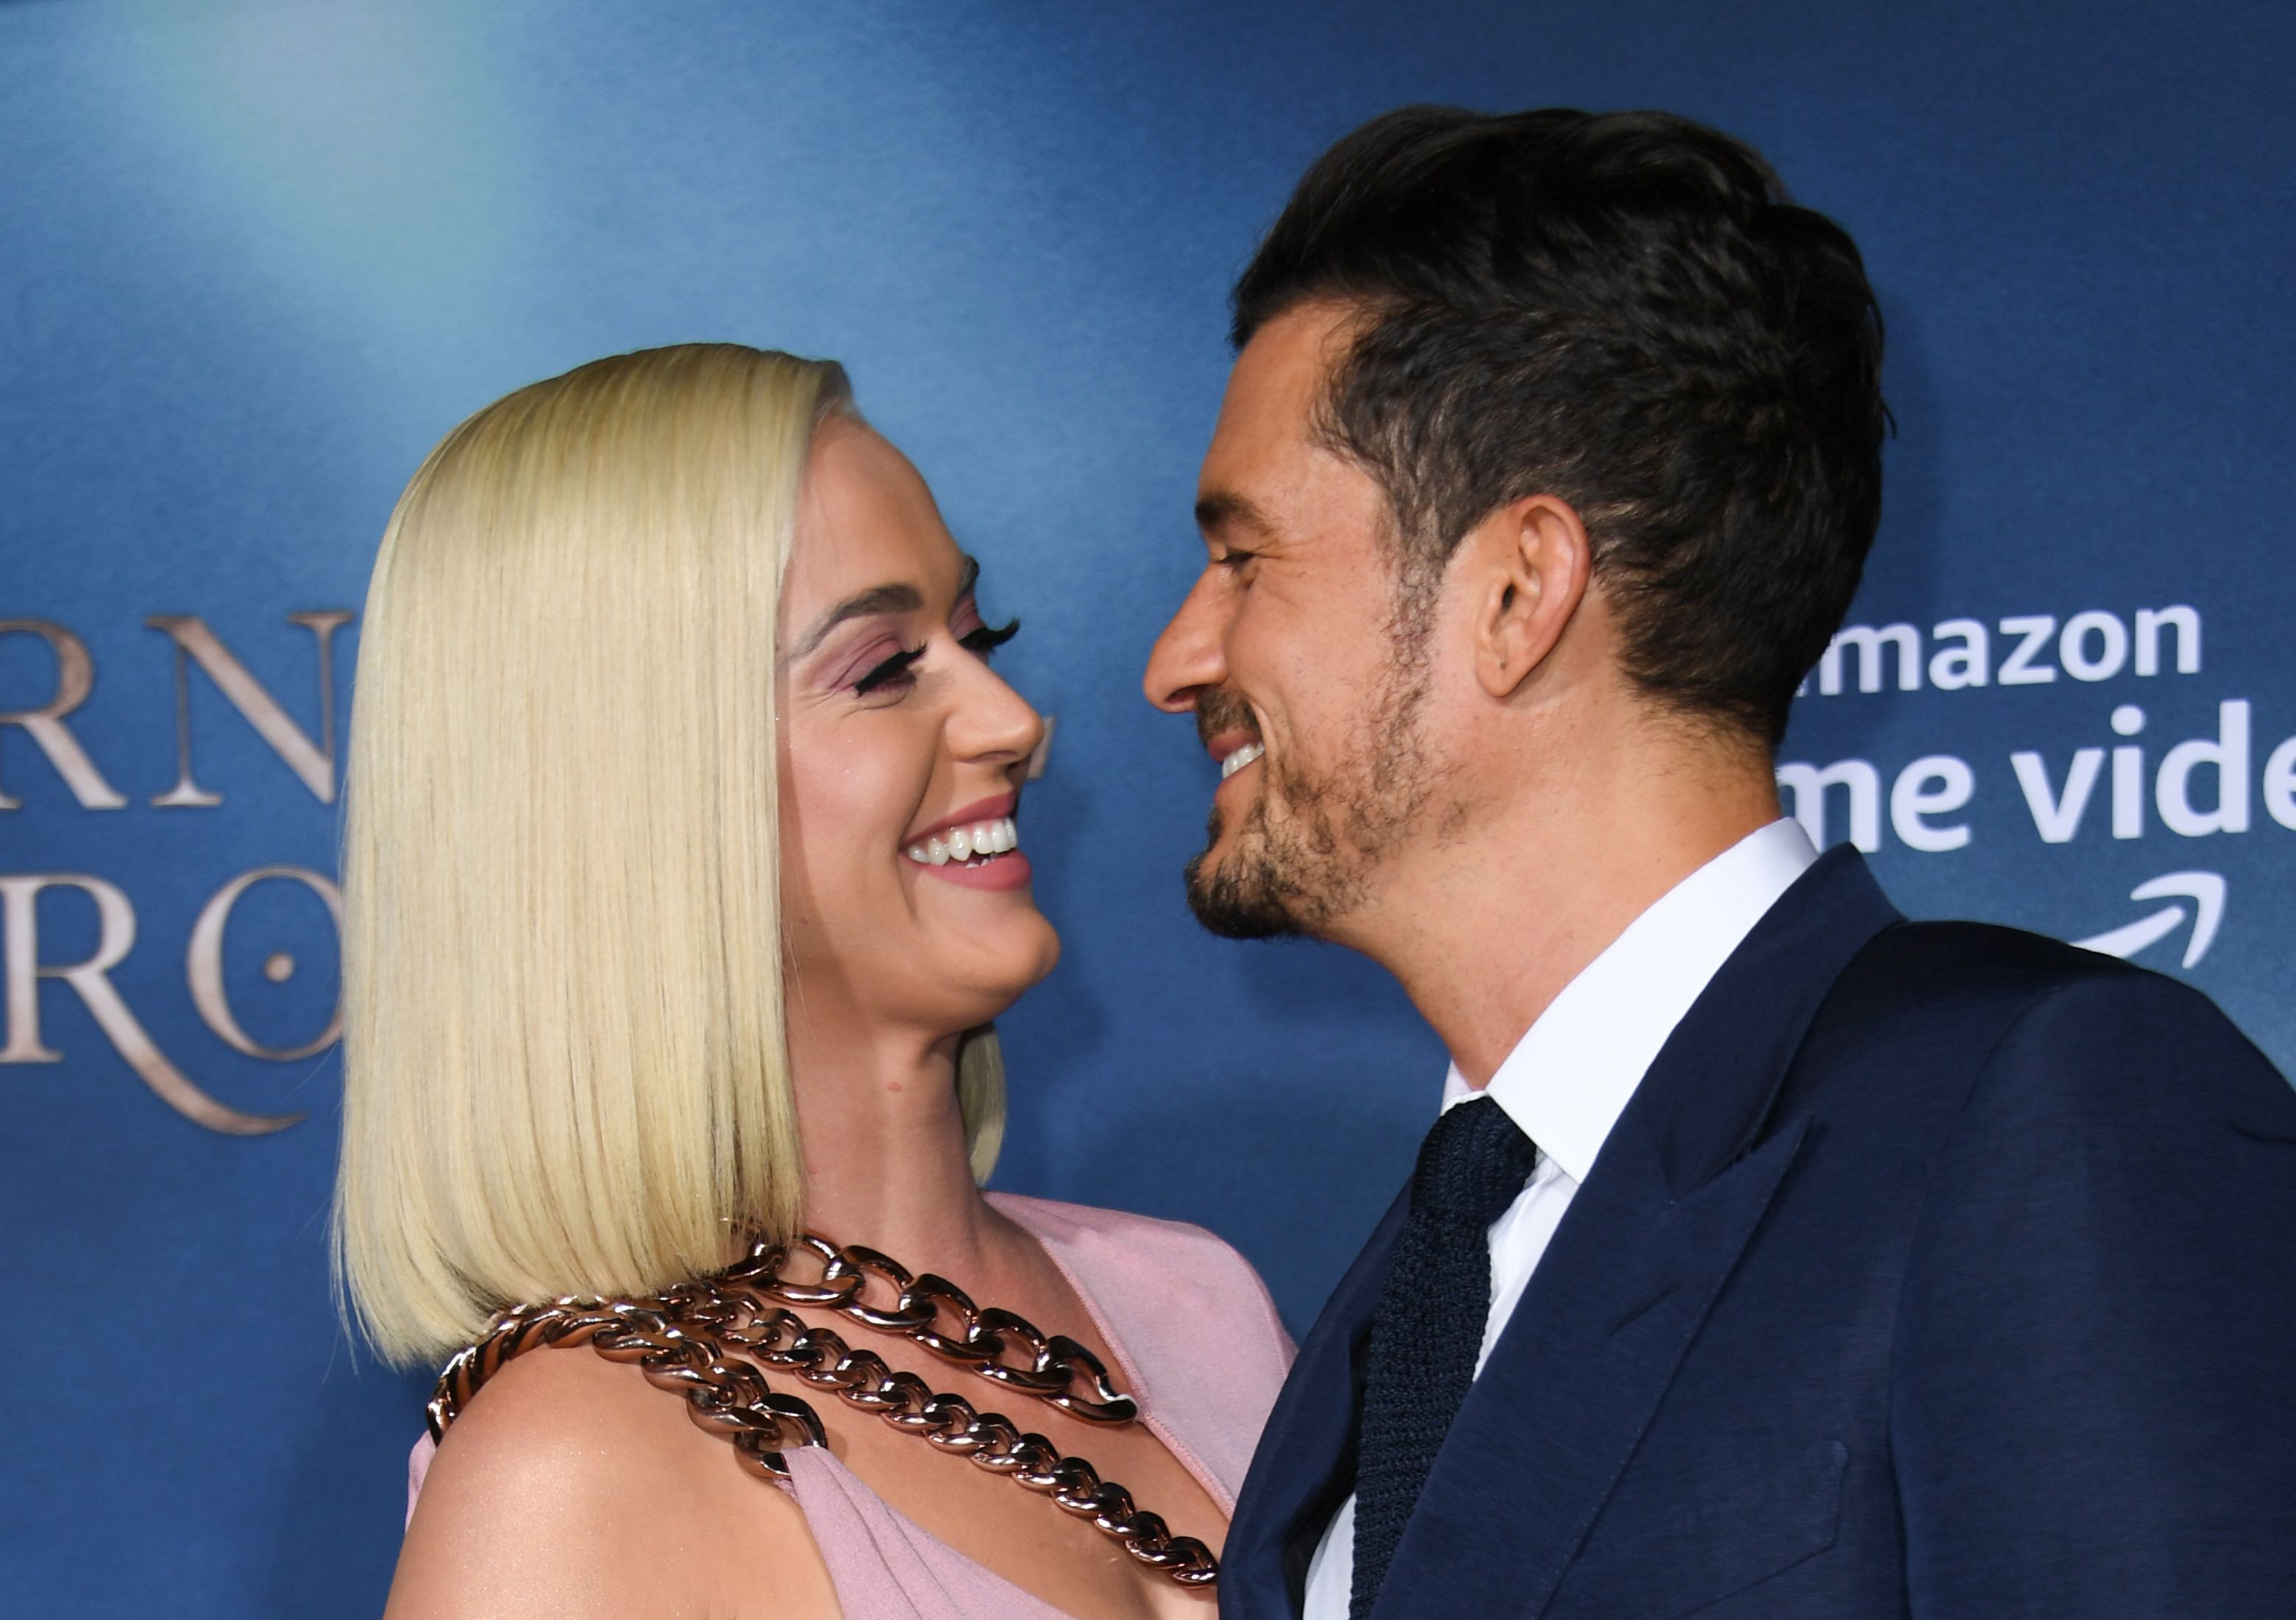 Singer/songwriter Katy Perry and actor Orlando Bloom